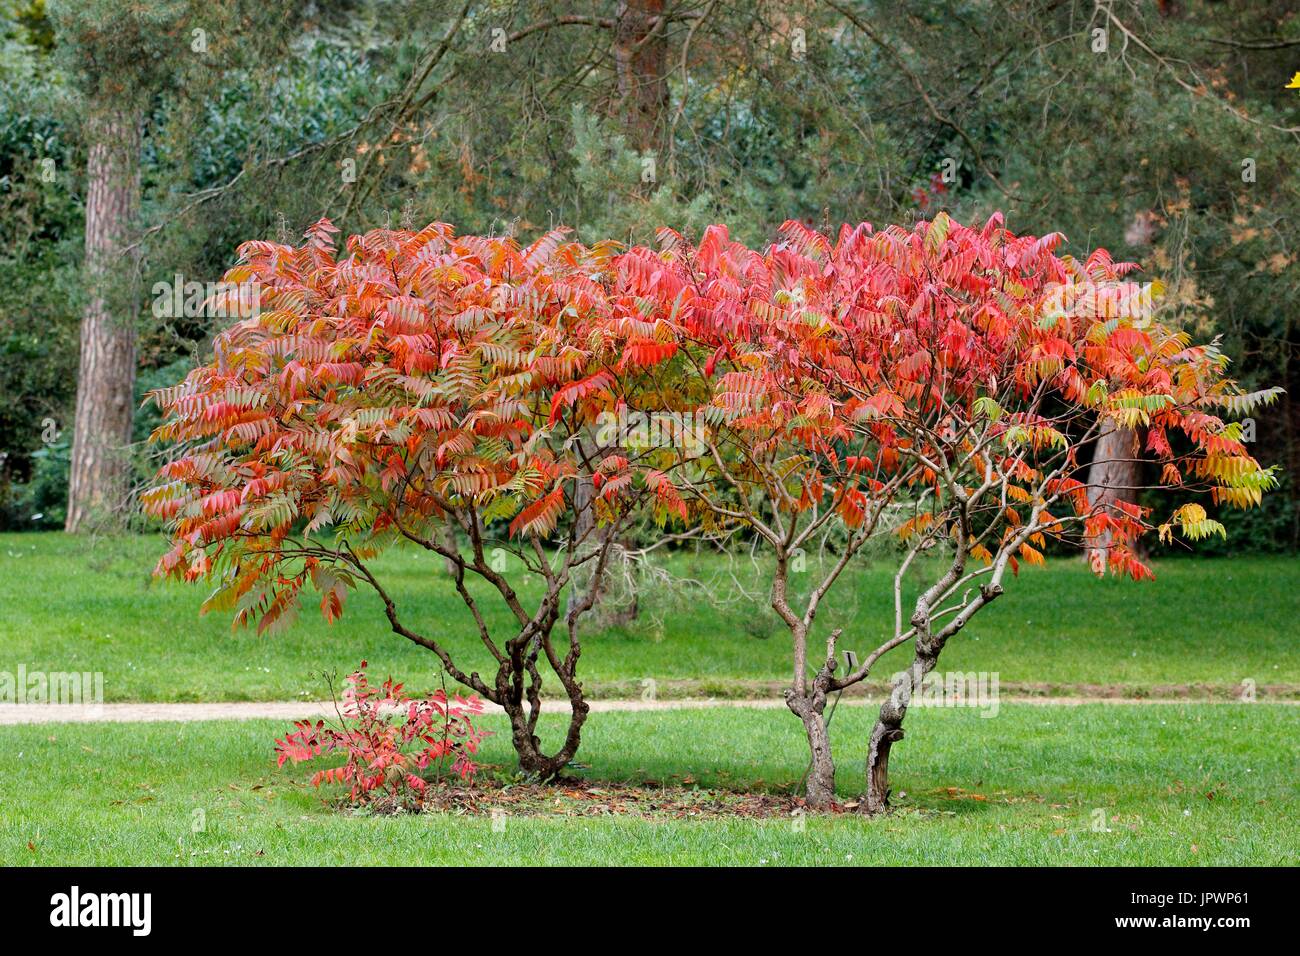 Smooth Sumac Rhus Glabra In Autumn At Parc Floral De Paris 12th Stock Photo Alamy,Crested Gecko Drawing